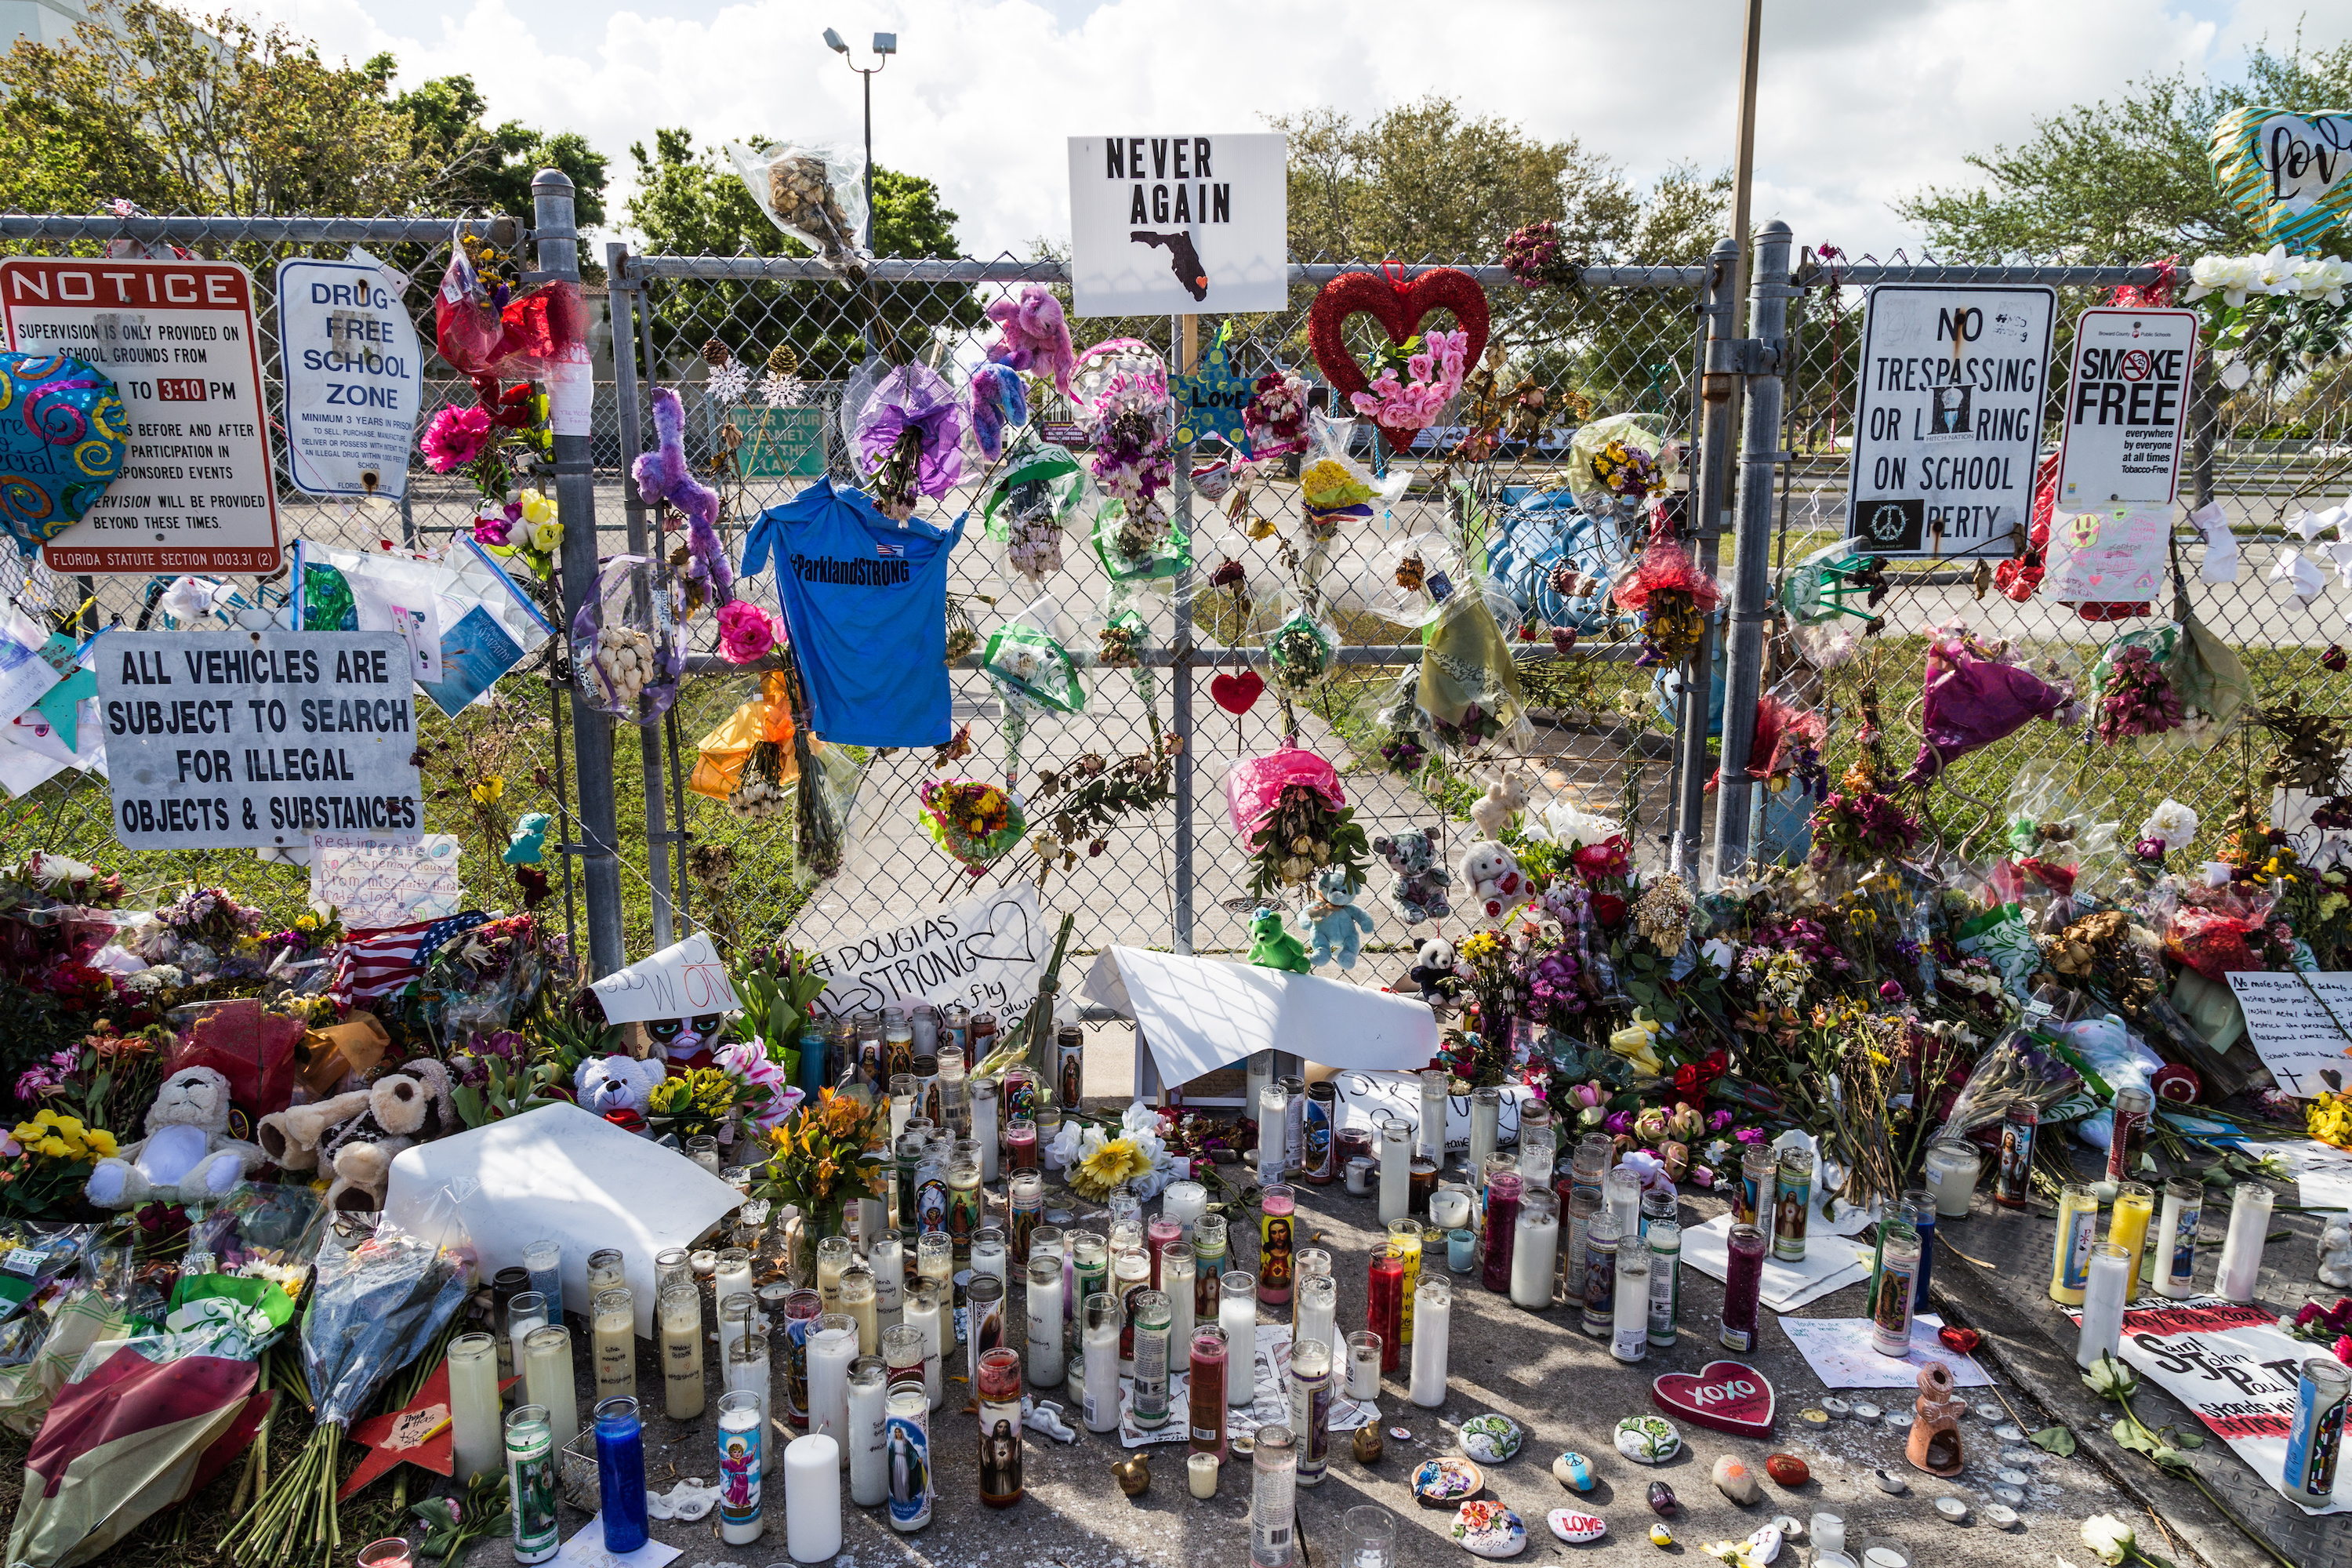 A memorial for the victims of the Marjory Stoneman Douglas High School shooting in 2018. (AdobeStock)